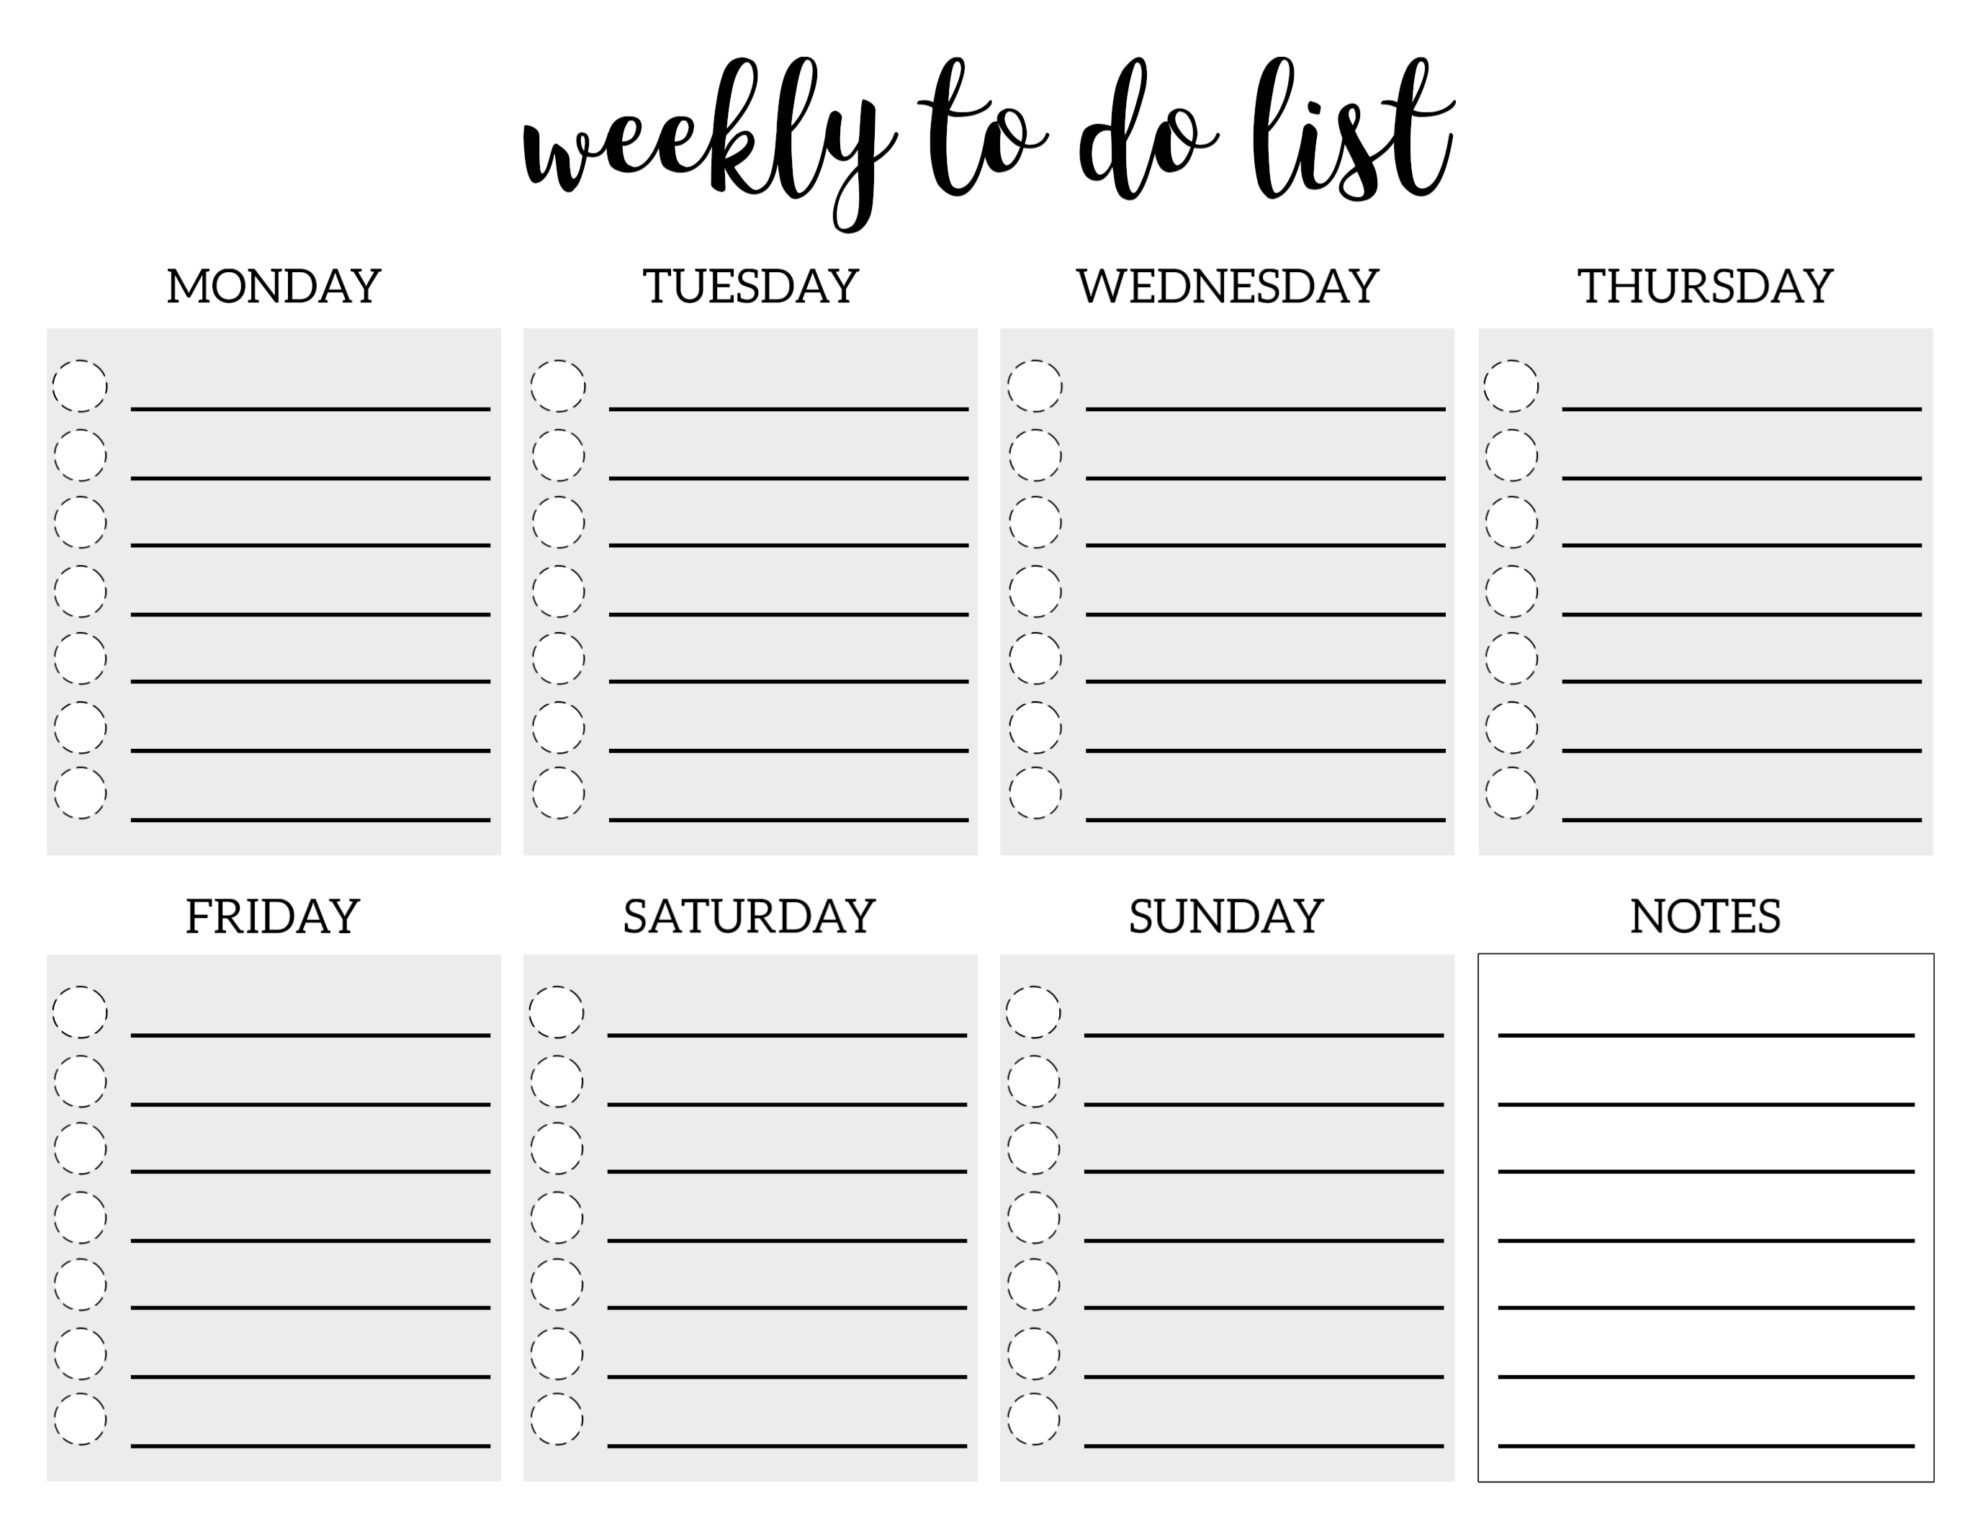 Weekly To Do List Printable Checklist Template  Paper Trail Design In Checklist With Boxes Template Pertaining To Checklist With Boxes Template